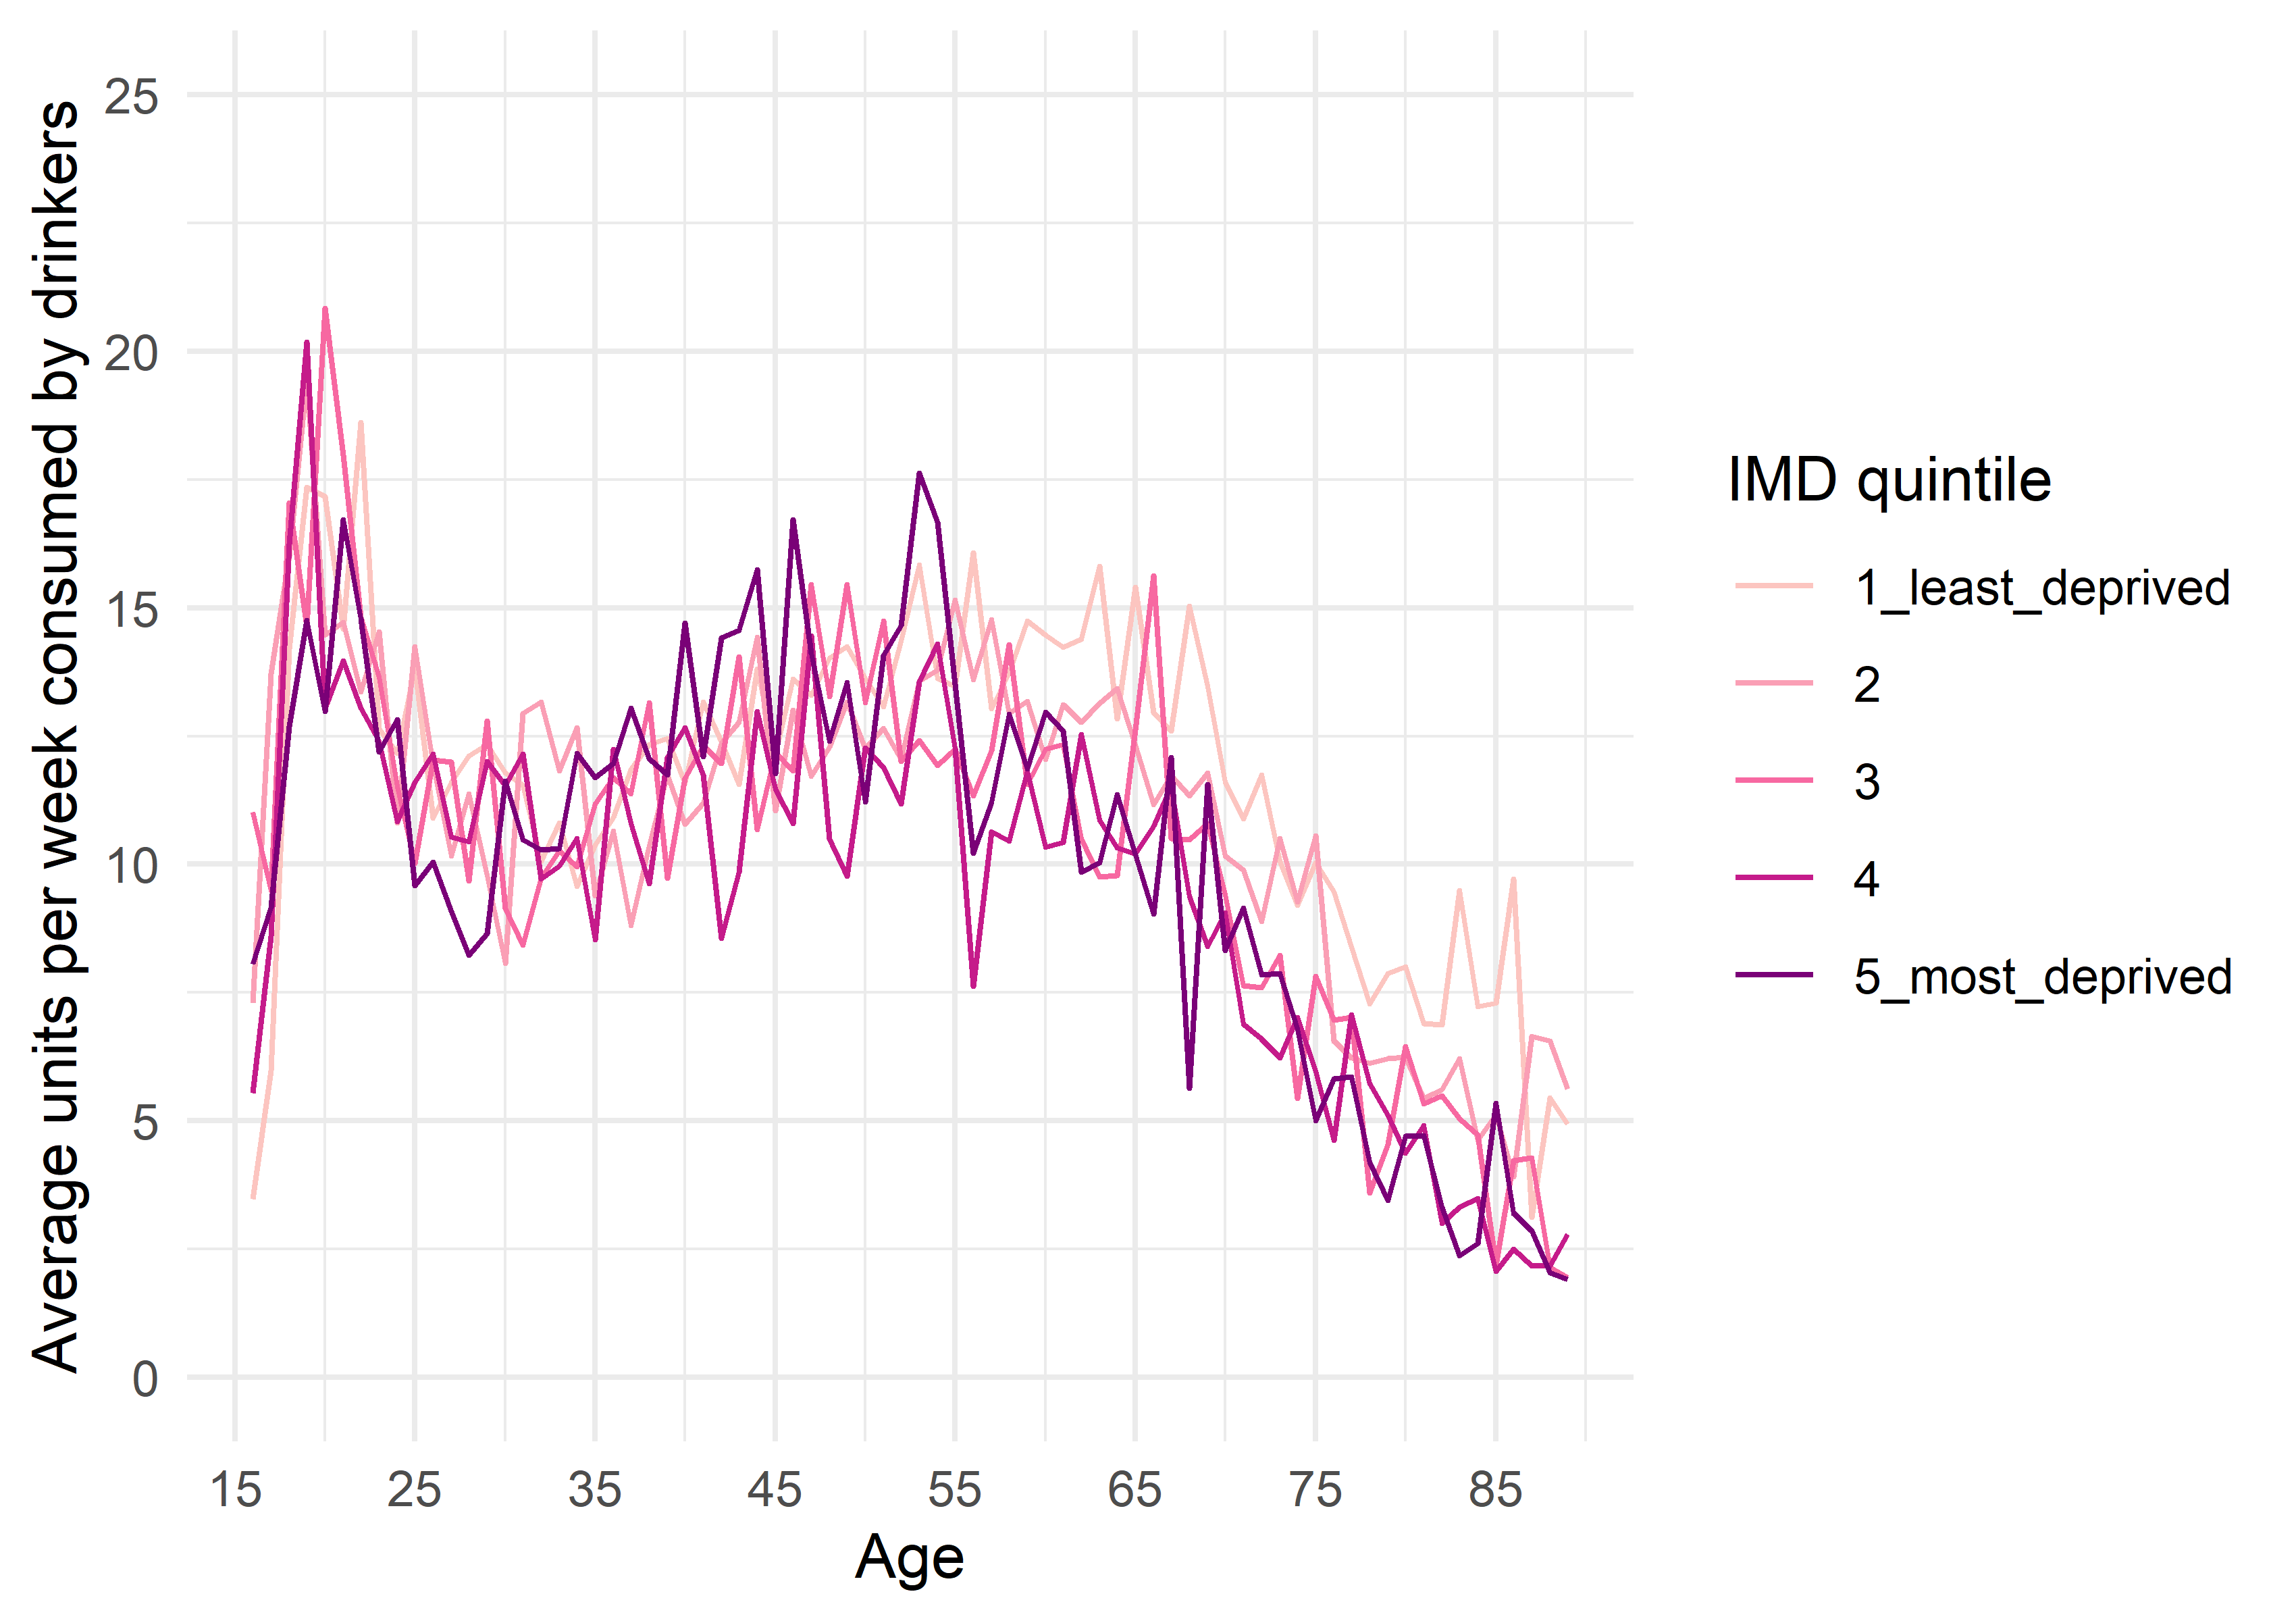 Figure 16. Index of Multiple Deprivation specific age trends in the average amount drunk per week by people who drink alcohol.